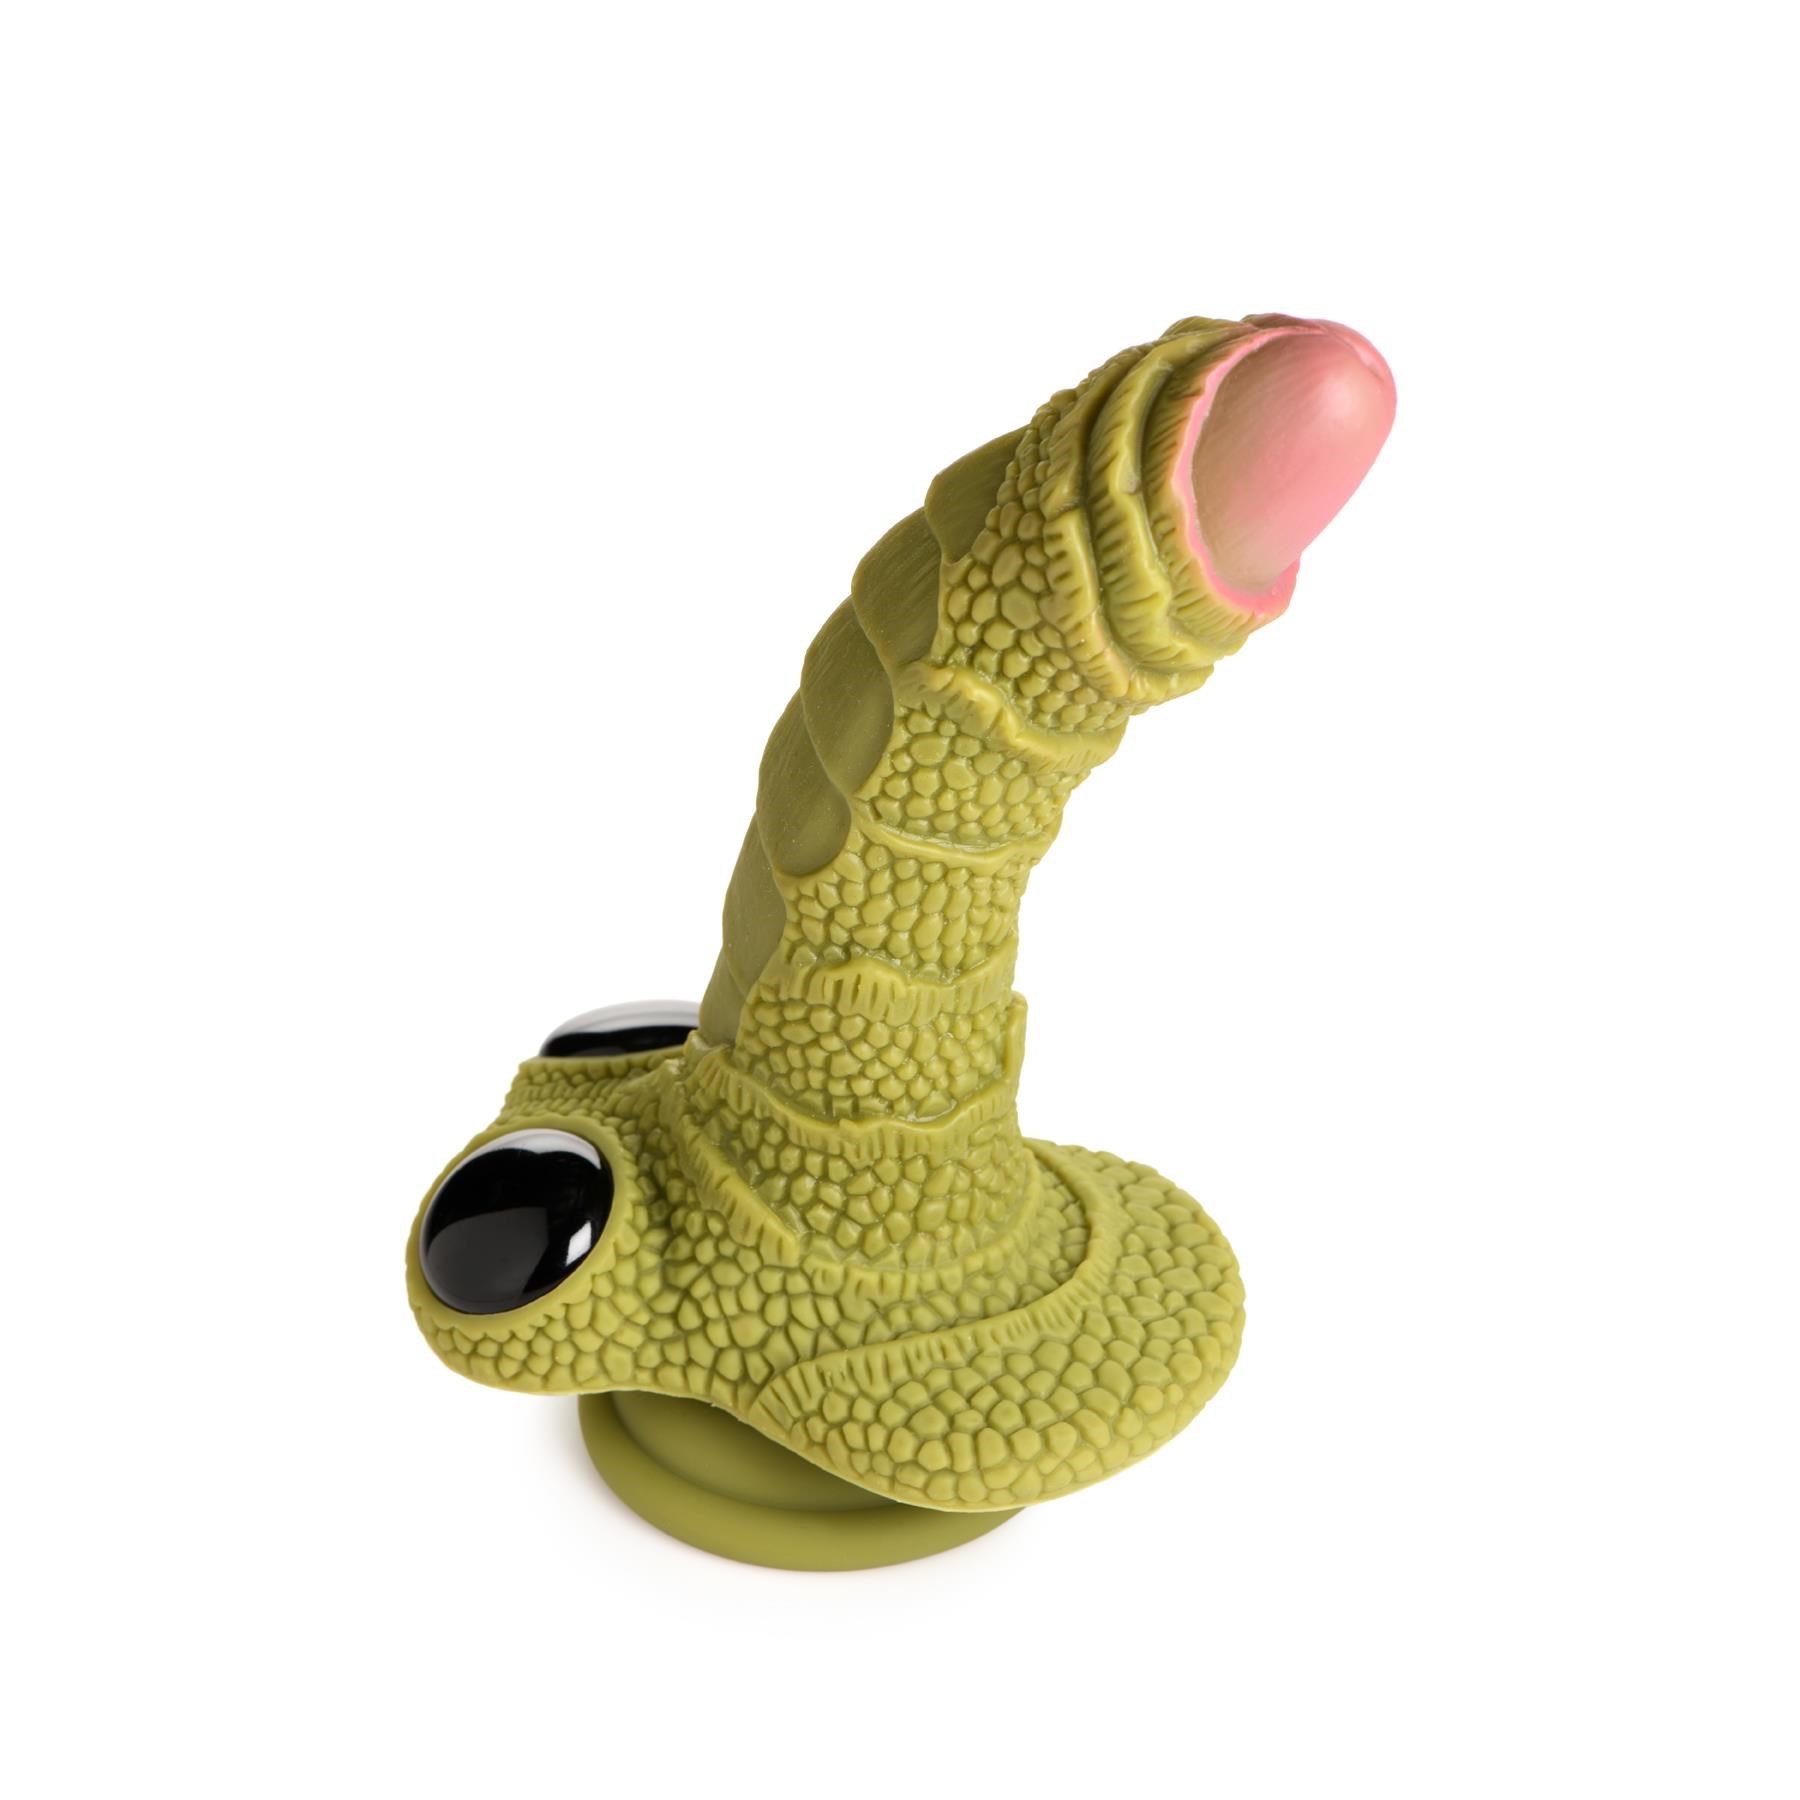 CreatureCocks Swamp Monster Scaly Dildo - Product Shot #4